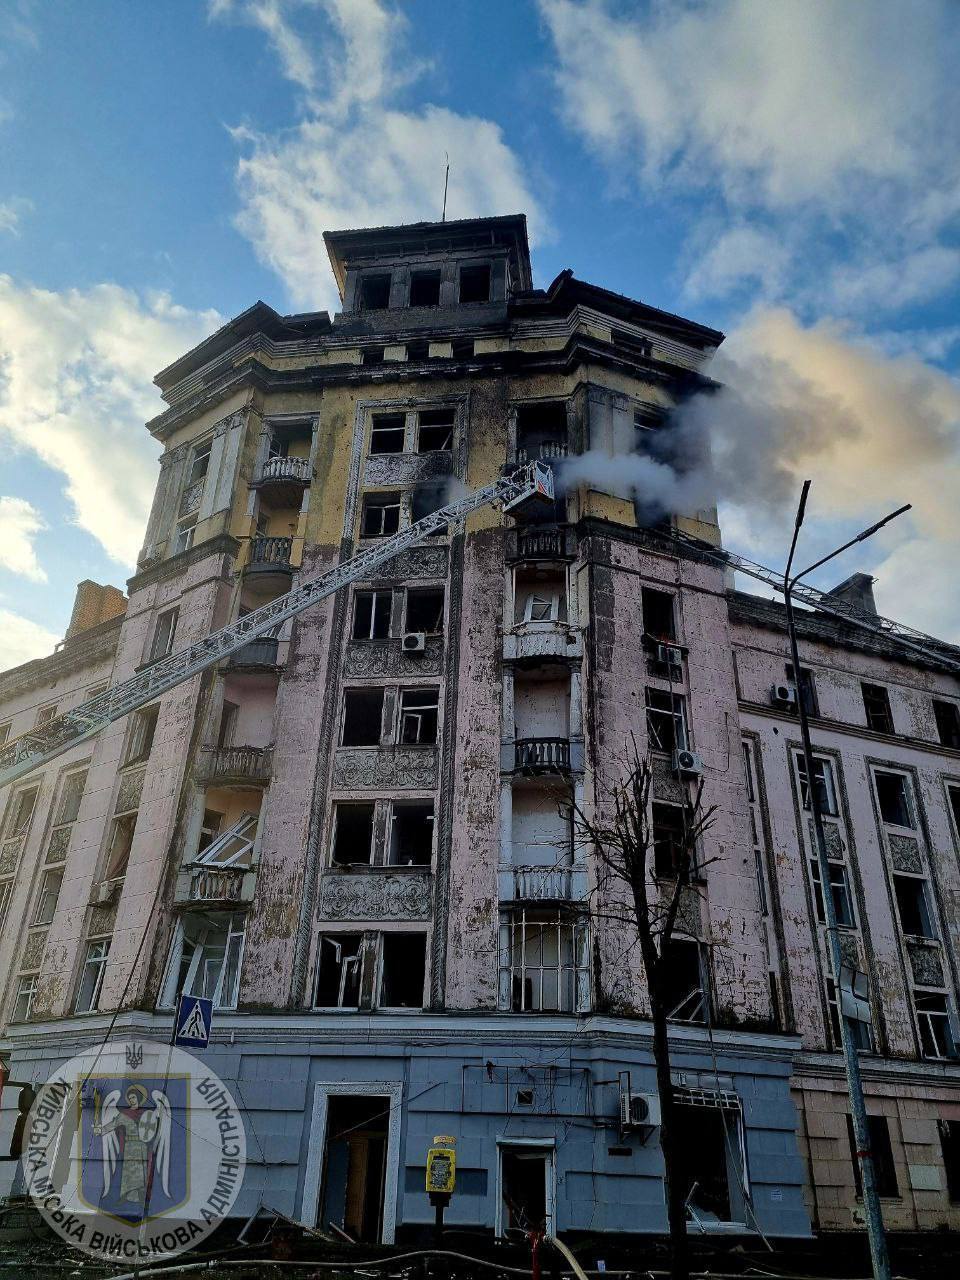 A crater at the site of the missile's impact and damaged buildings: the aftermath of the missile attack on Kyiv on March 21. Photo